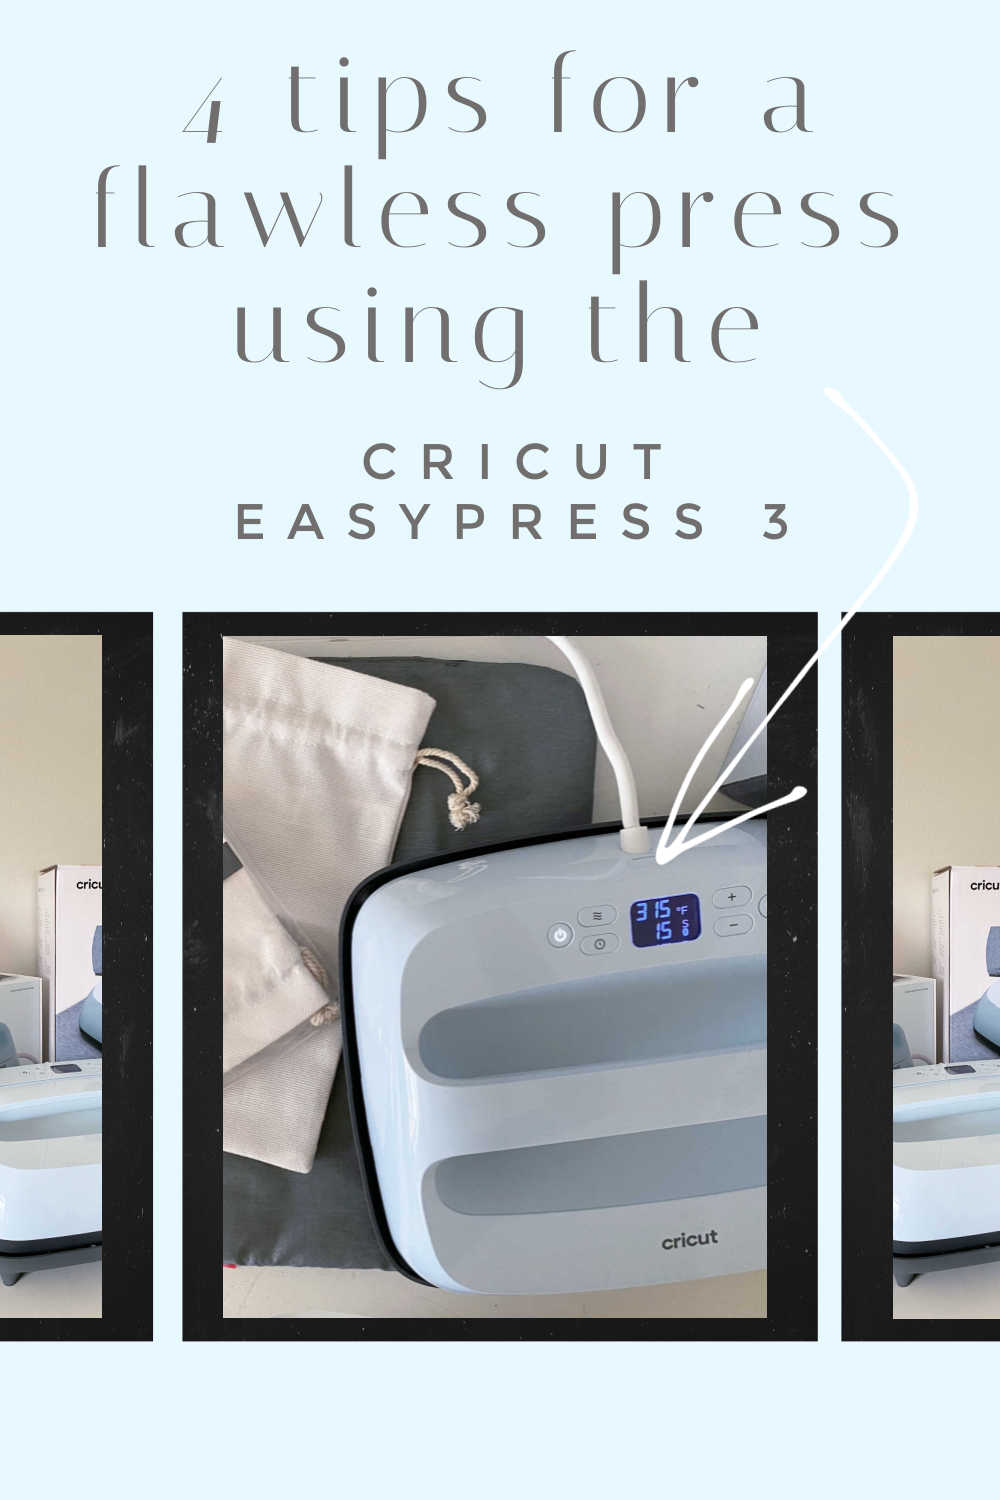 Introducing the Cricut EasyPress 3 and the Cricut Hat Press: An Honest  Review